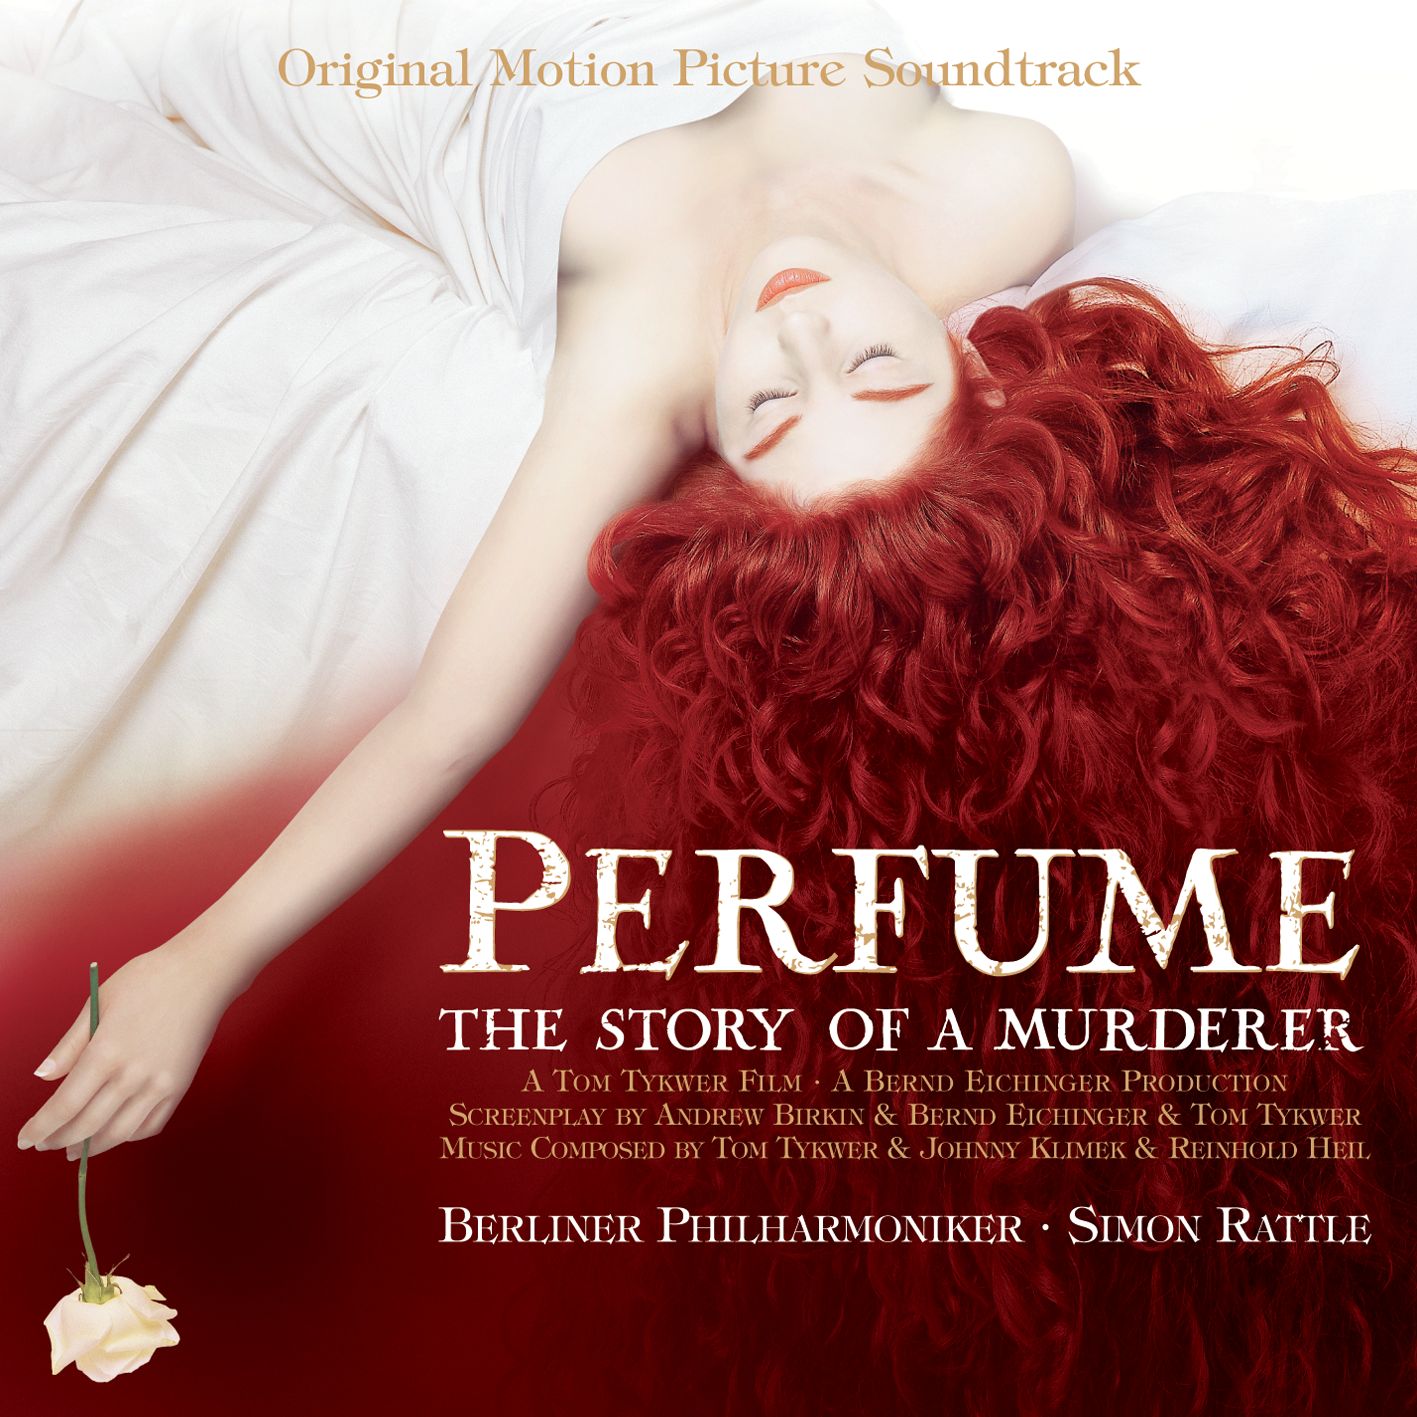 Perfume:The Story of a Murderer: Grenouille's childhood